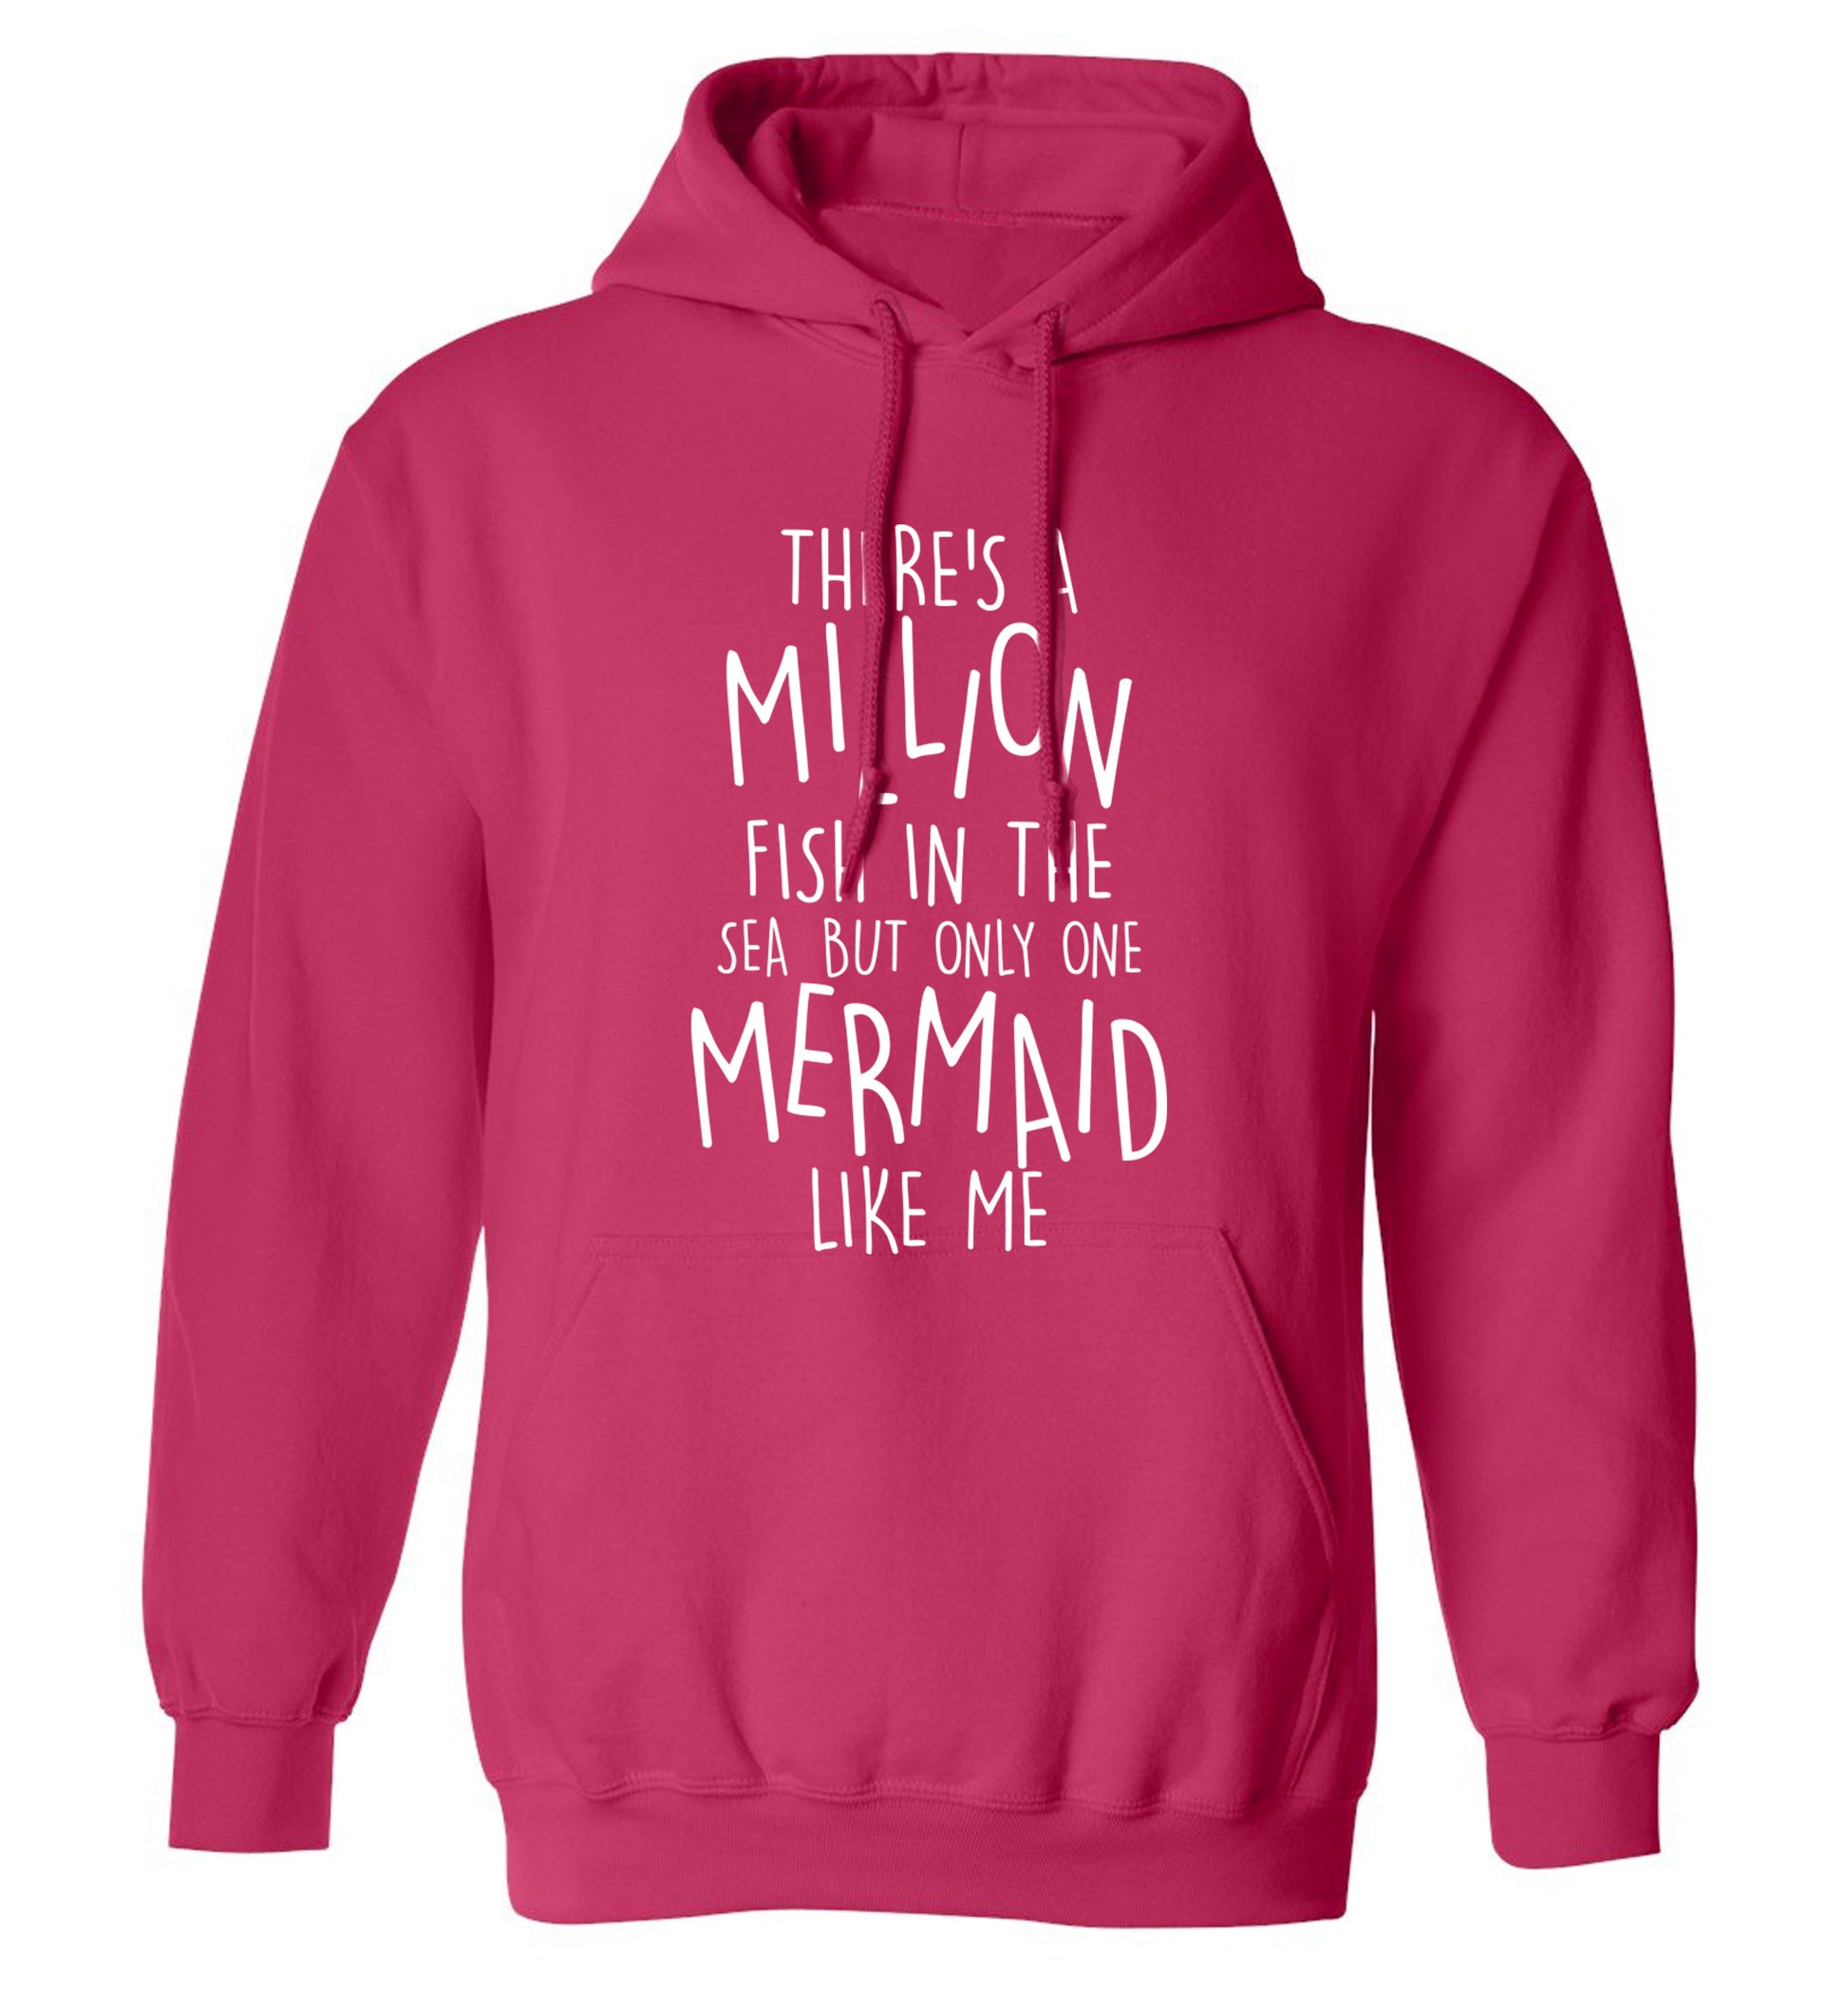 There's a million fish in the sea but only one mermaid like me adults unisex pink hoodie 2XL